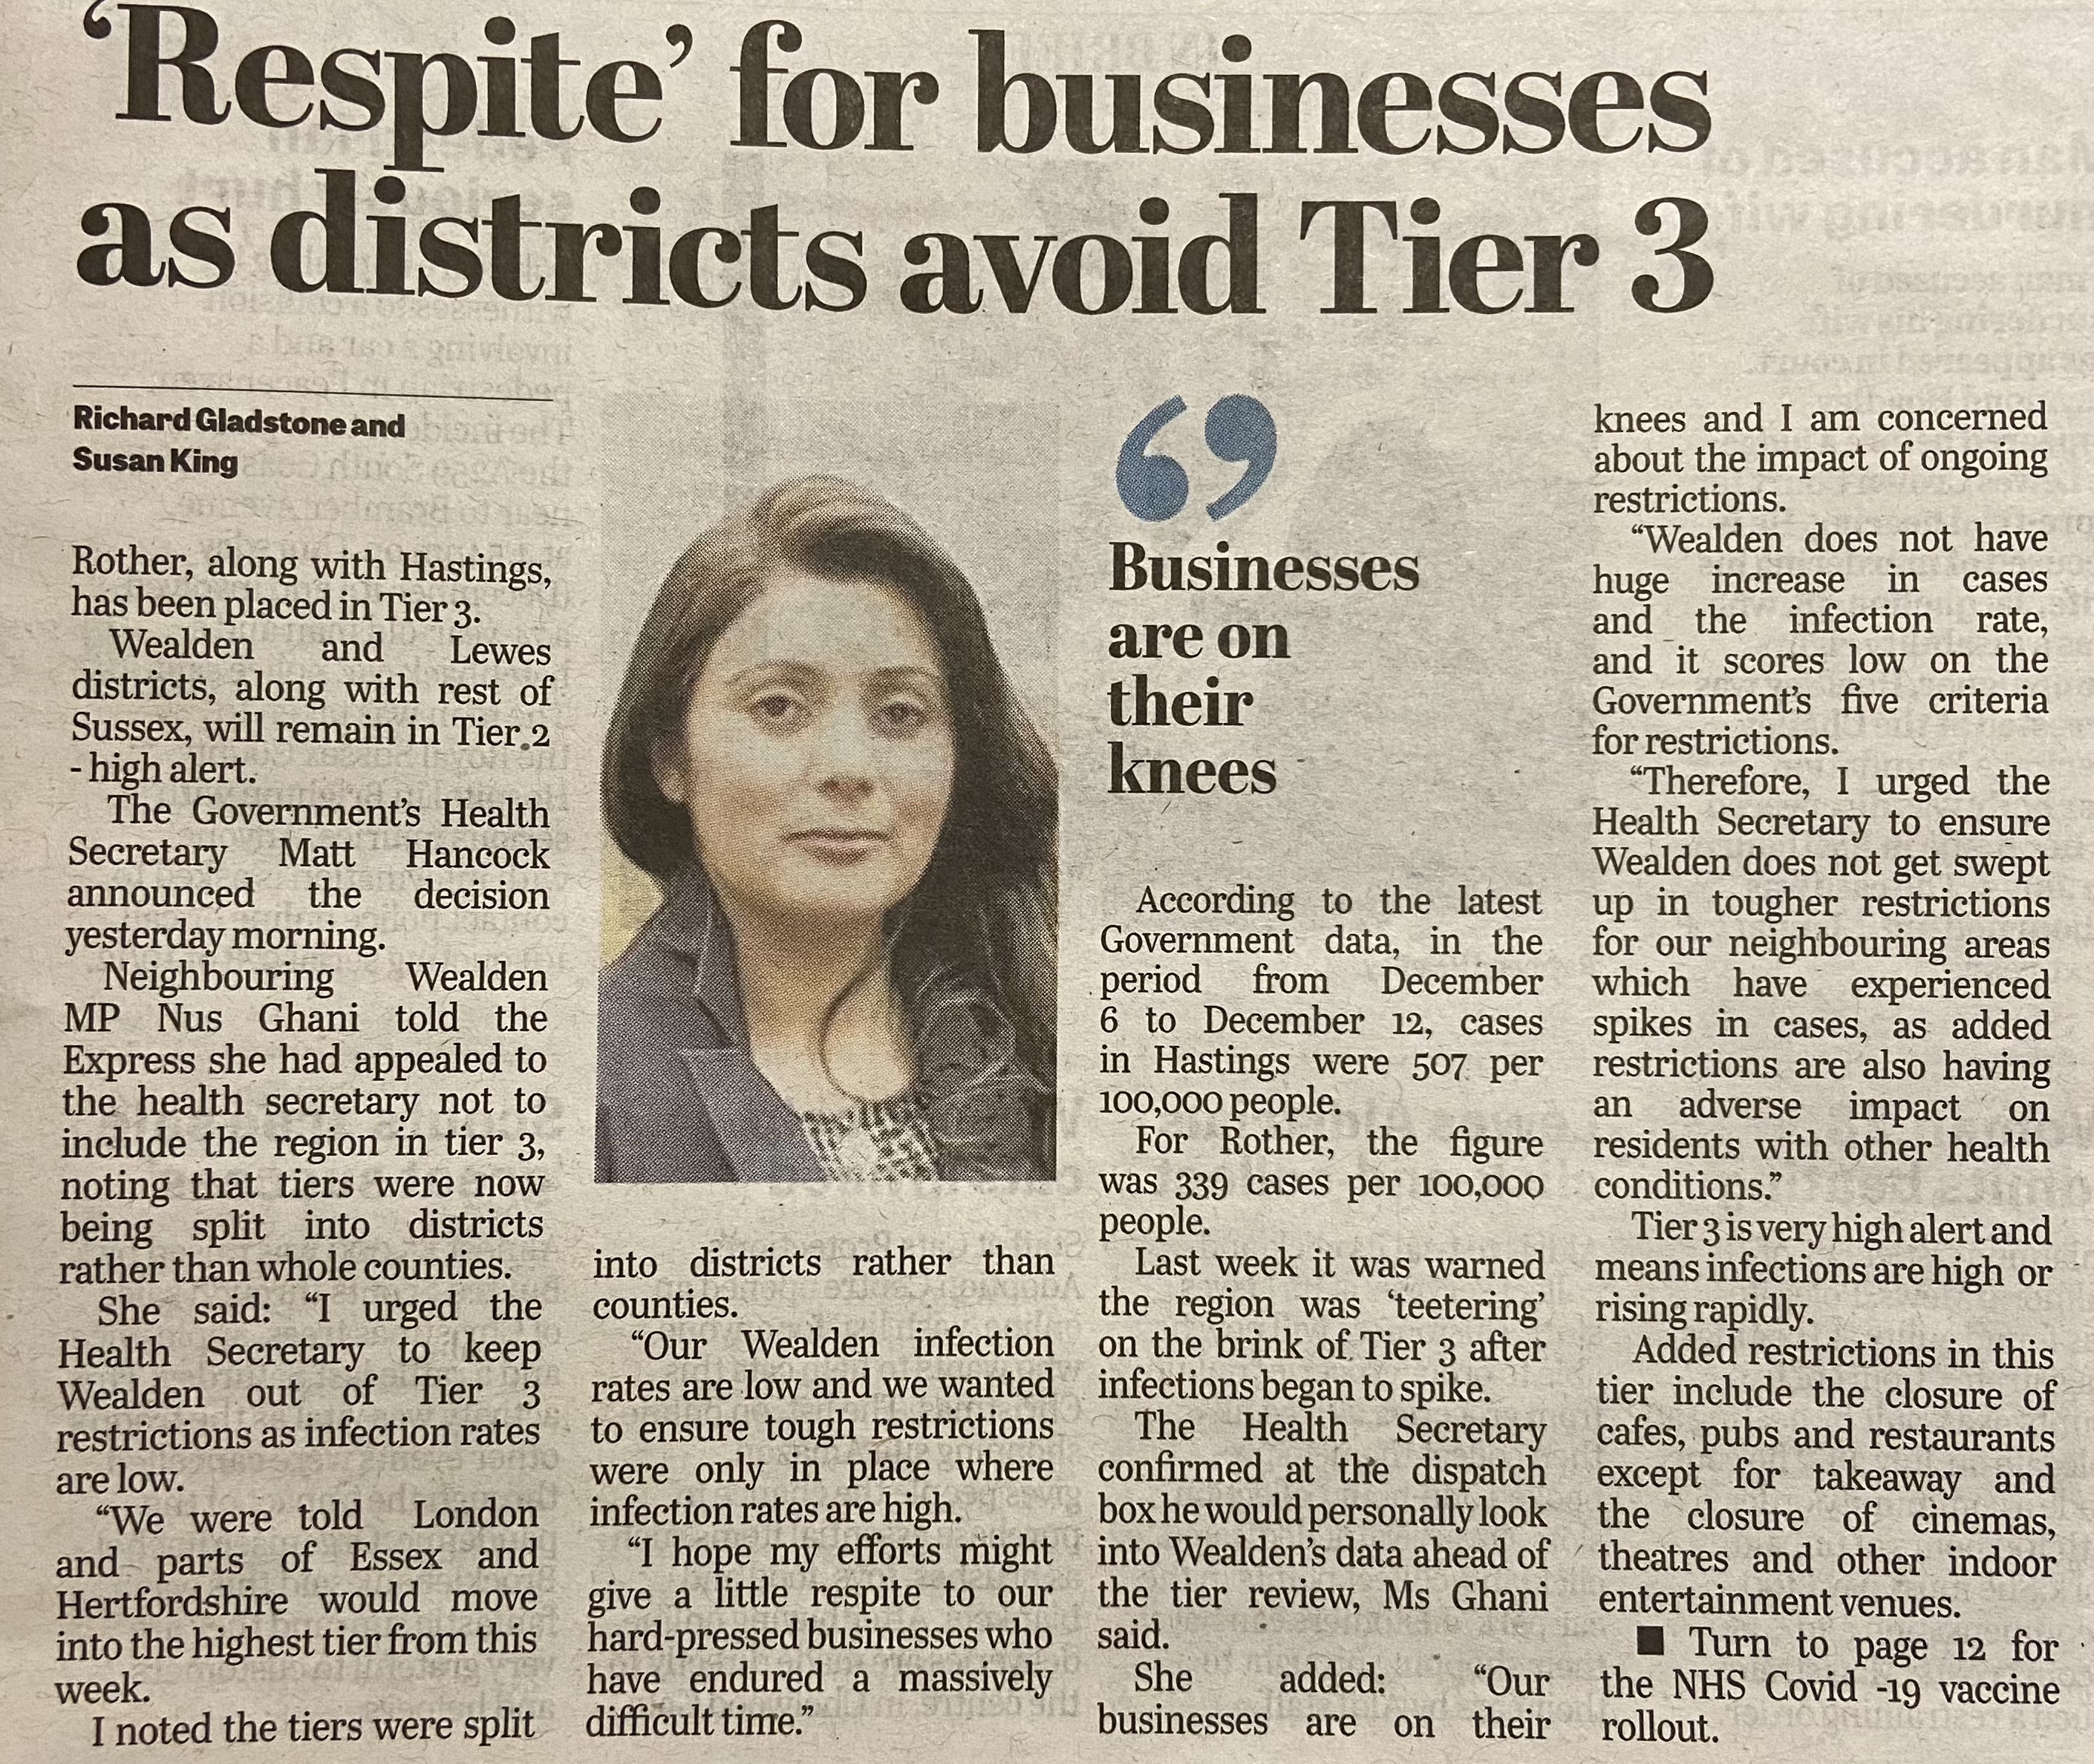 Sussex Express -'Respite' for businesses as districts avoid Tier 3